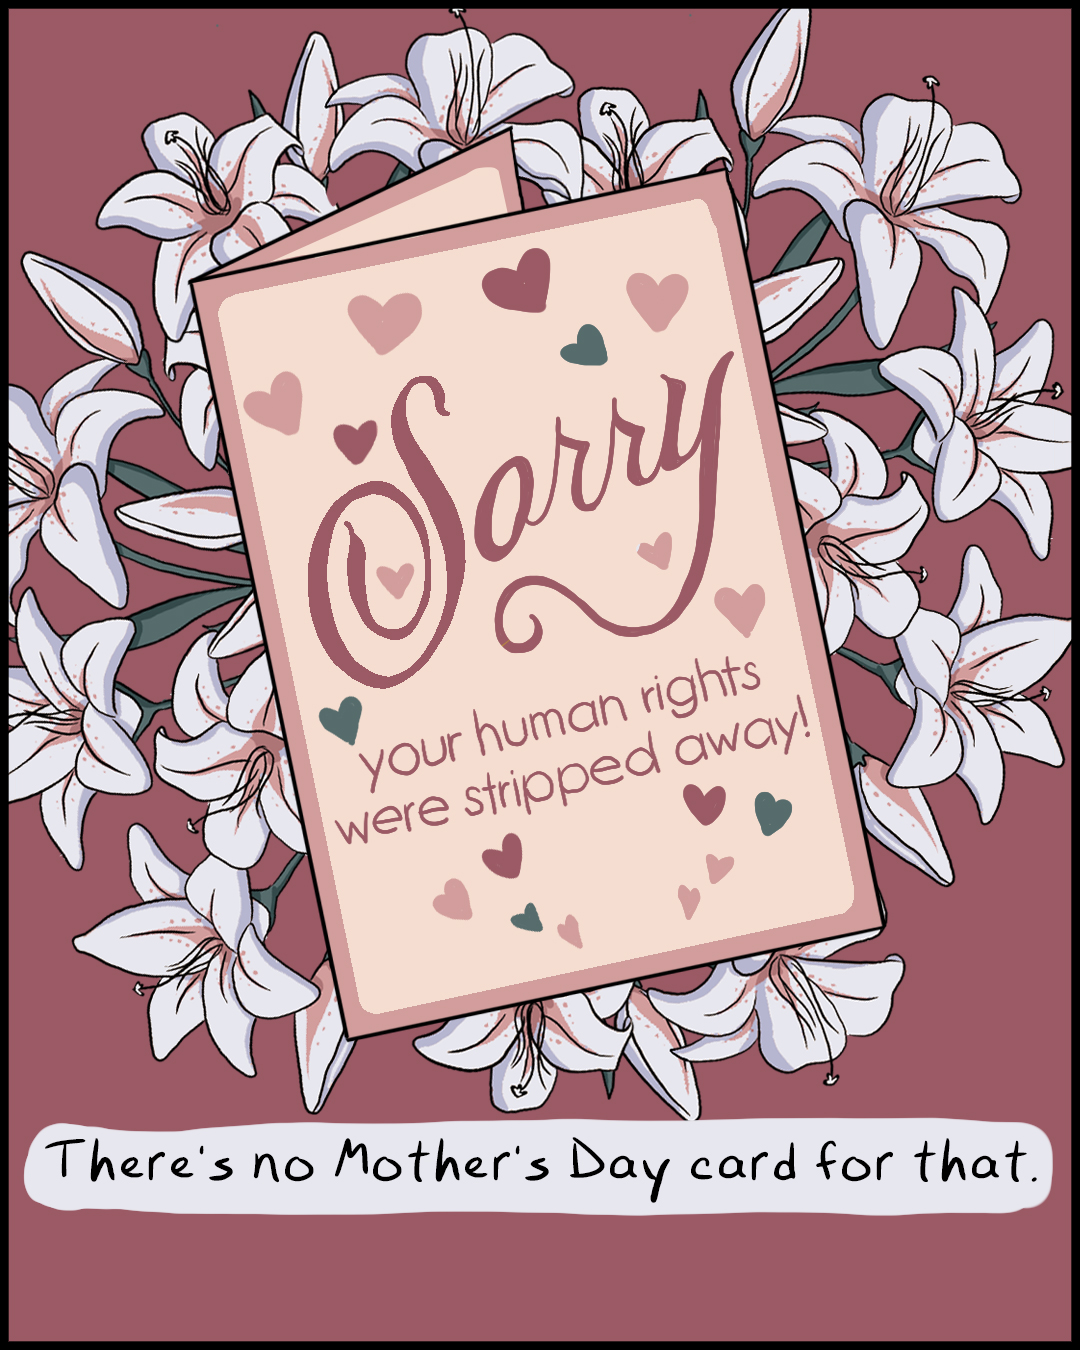 Flowers and Cards Are Nice. I'd Rather Have Bodily Autonomy